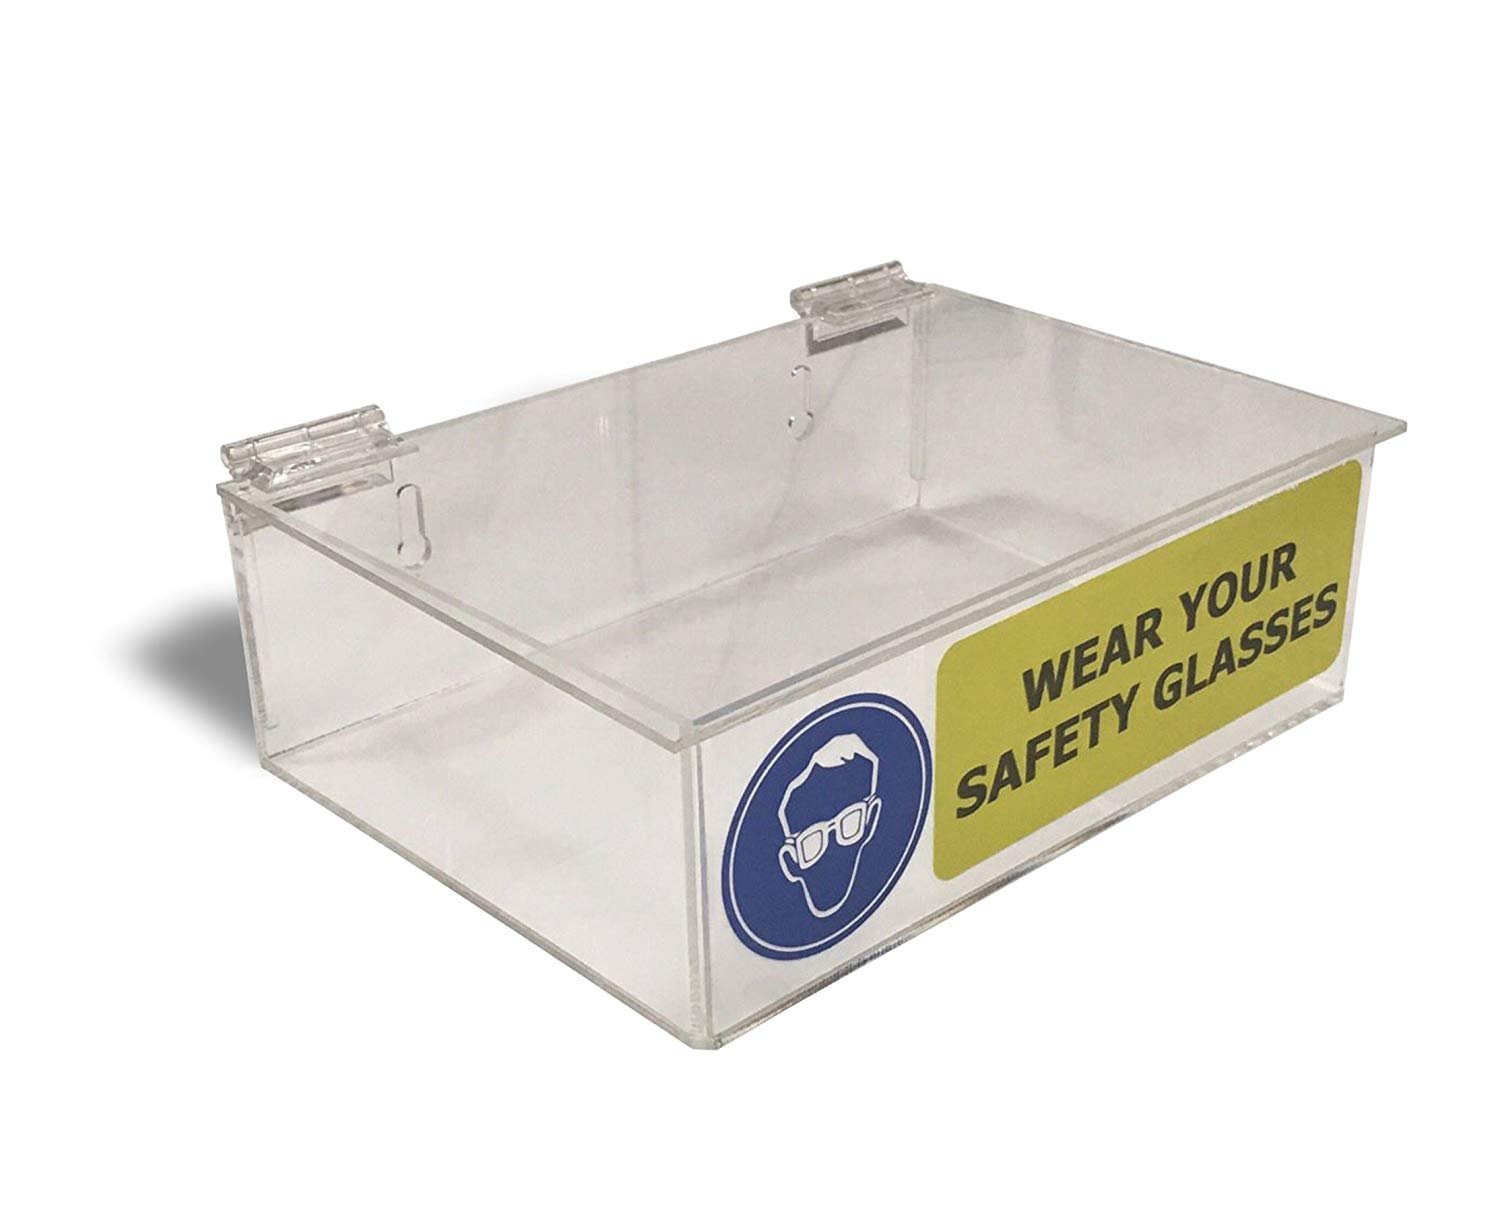 Acrylic Safety Products